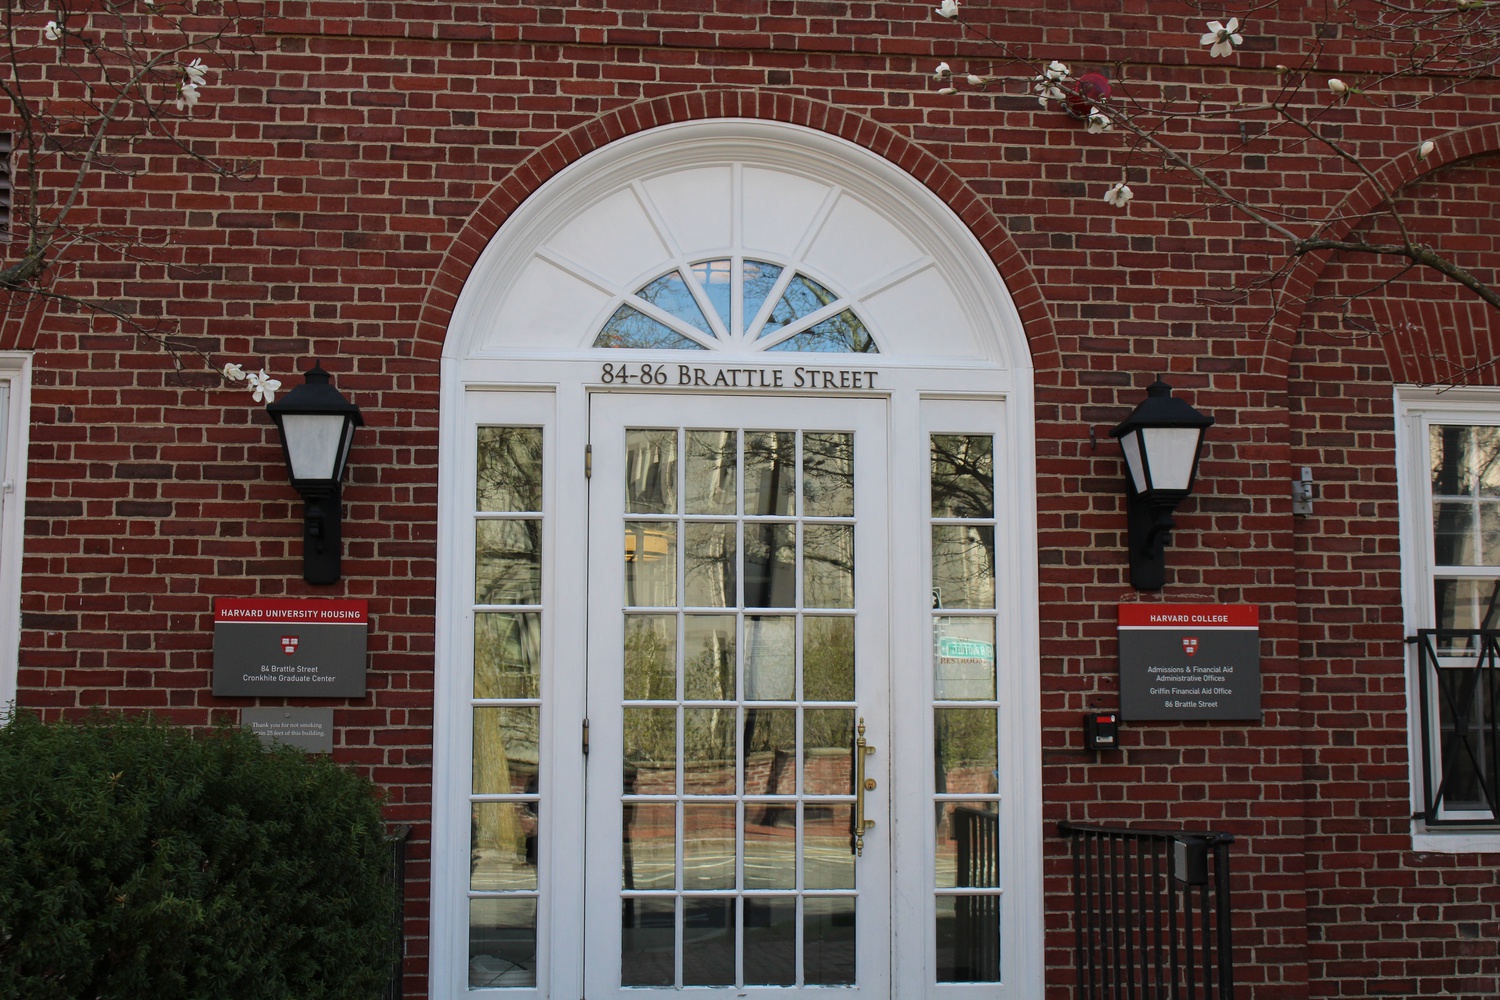 The Harvard College Office of Admissions and Financial Aid is located at 86 Brattle Street in Radcliffe Yard.